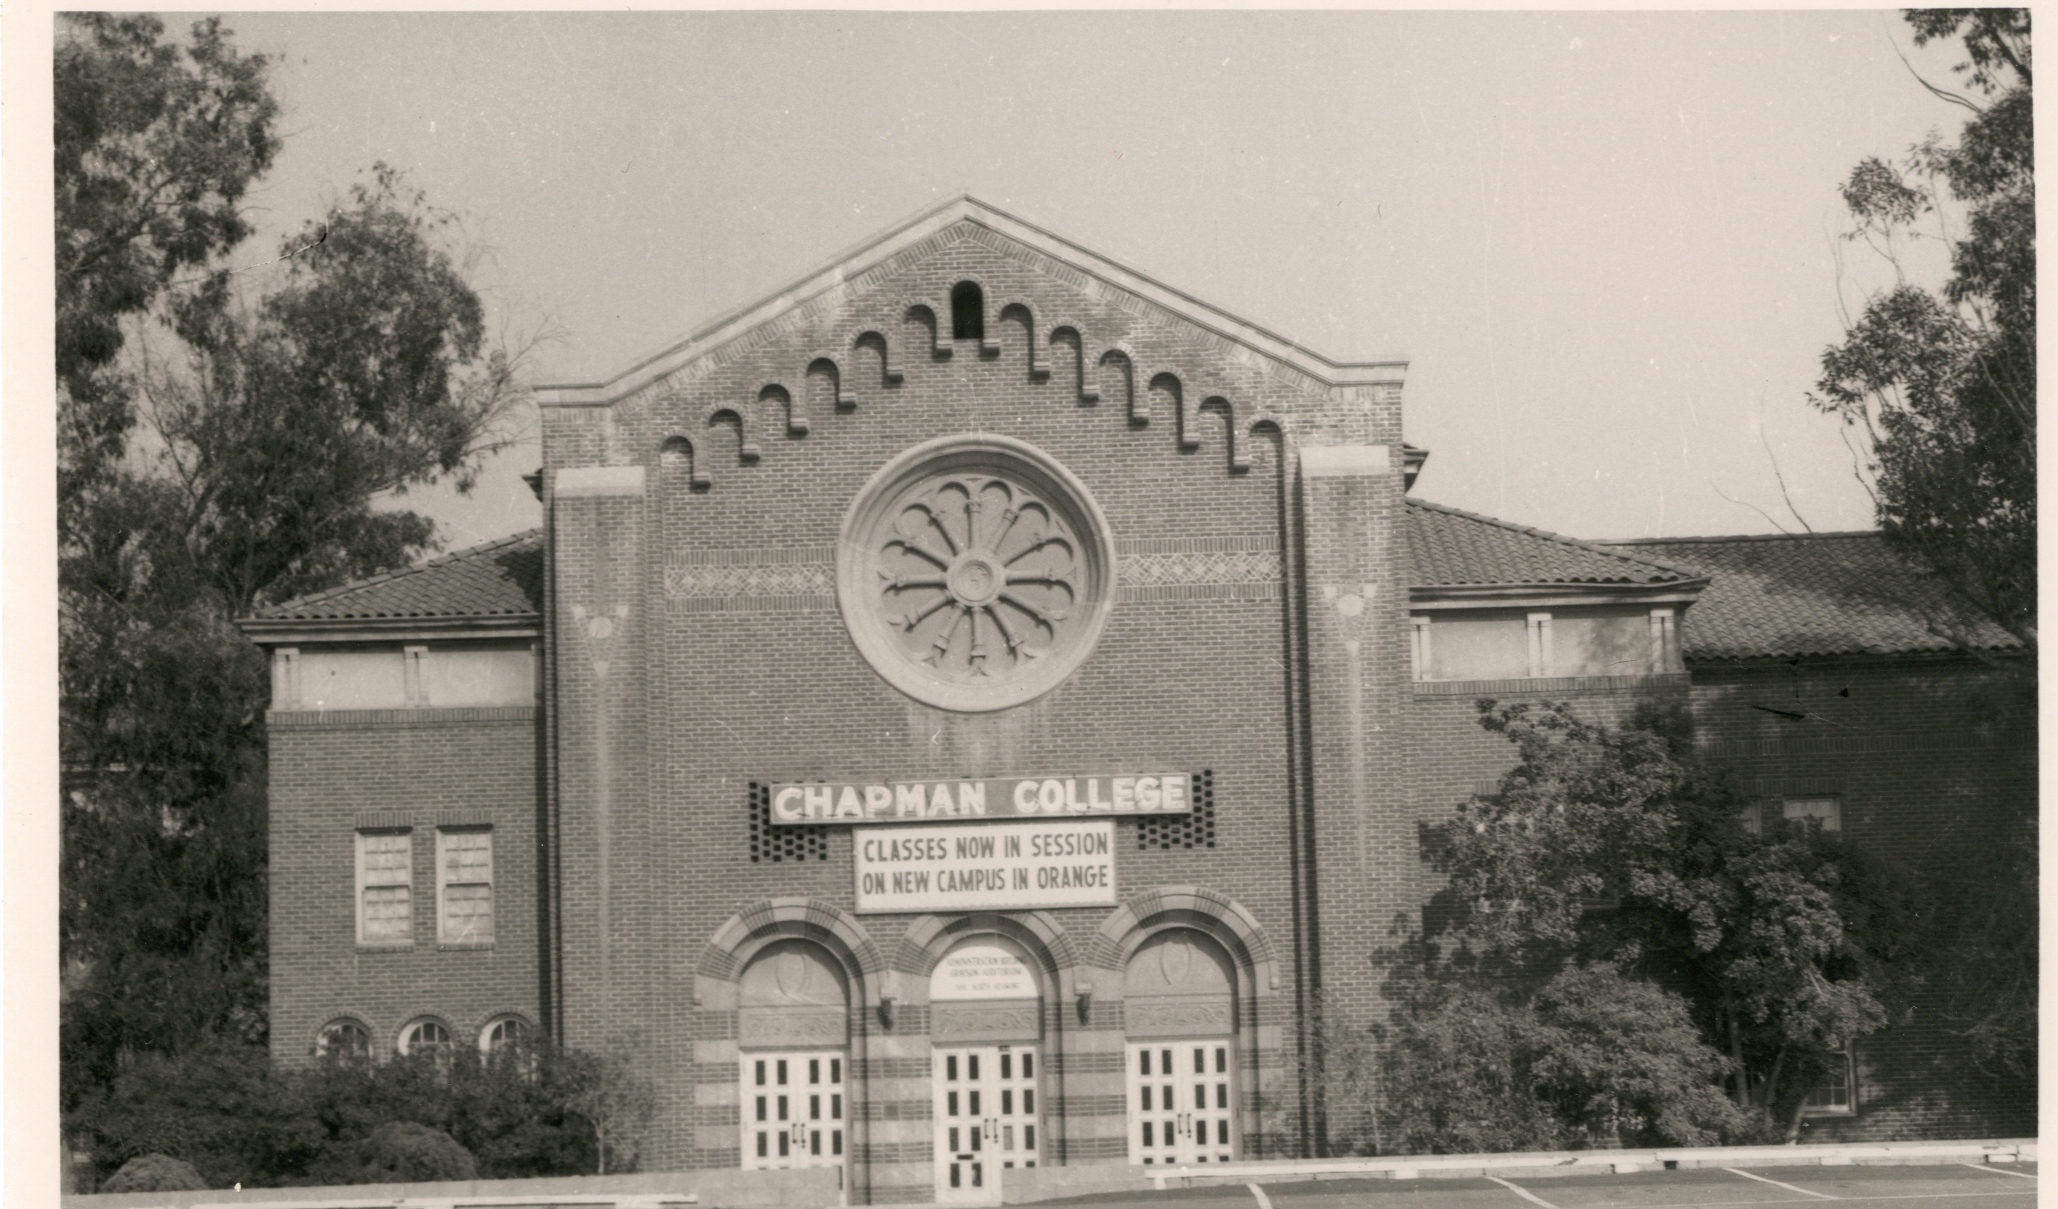 5. Fine Arts Building, California Christian College, now known as Chapman University, Los Angeles, 1927. (University Archives)